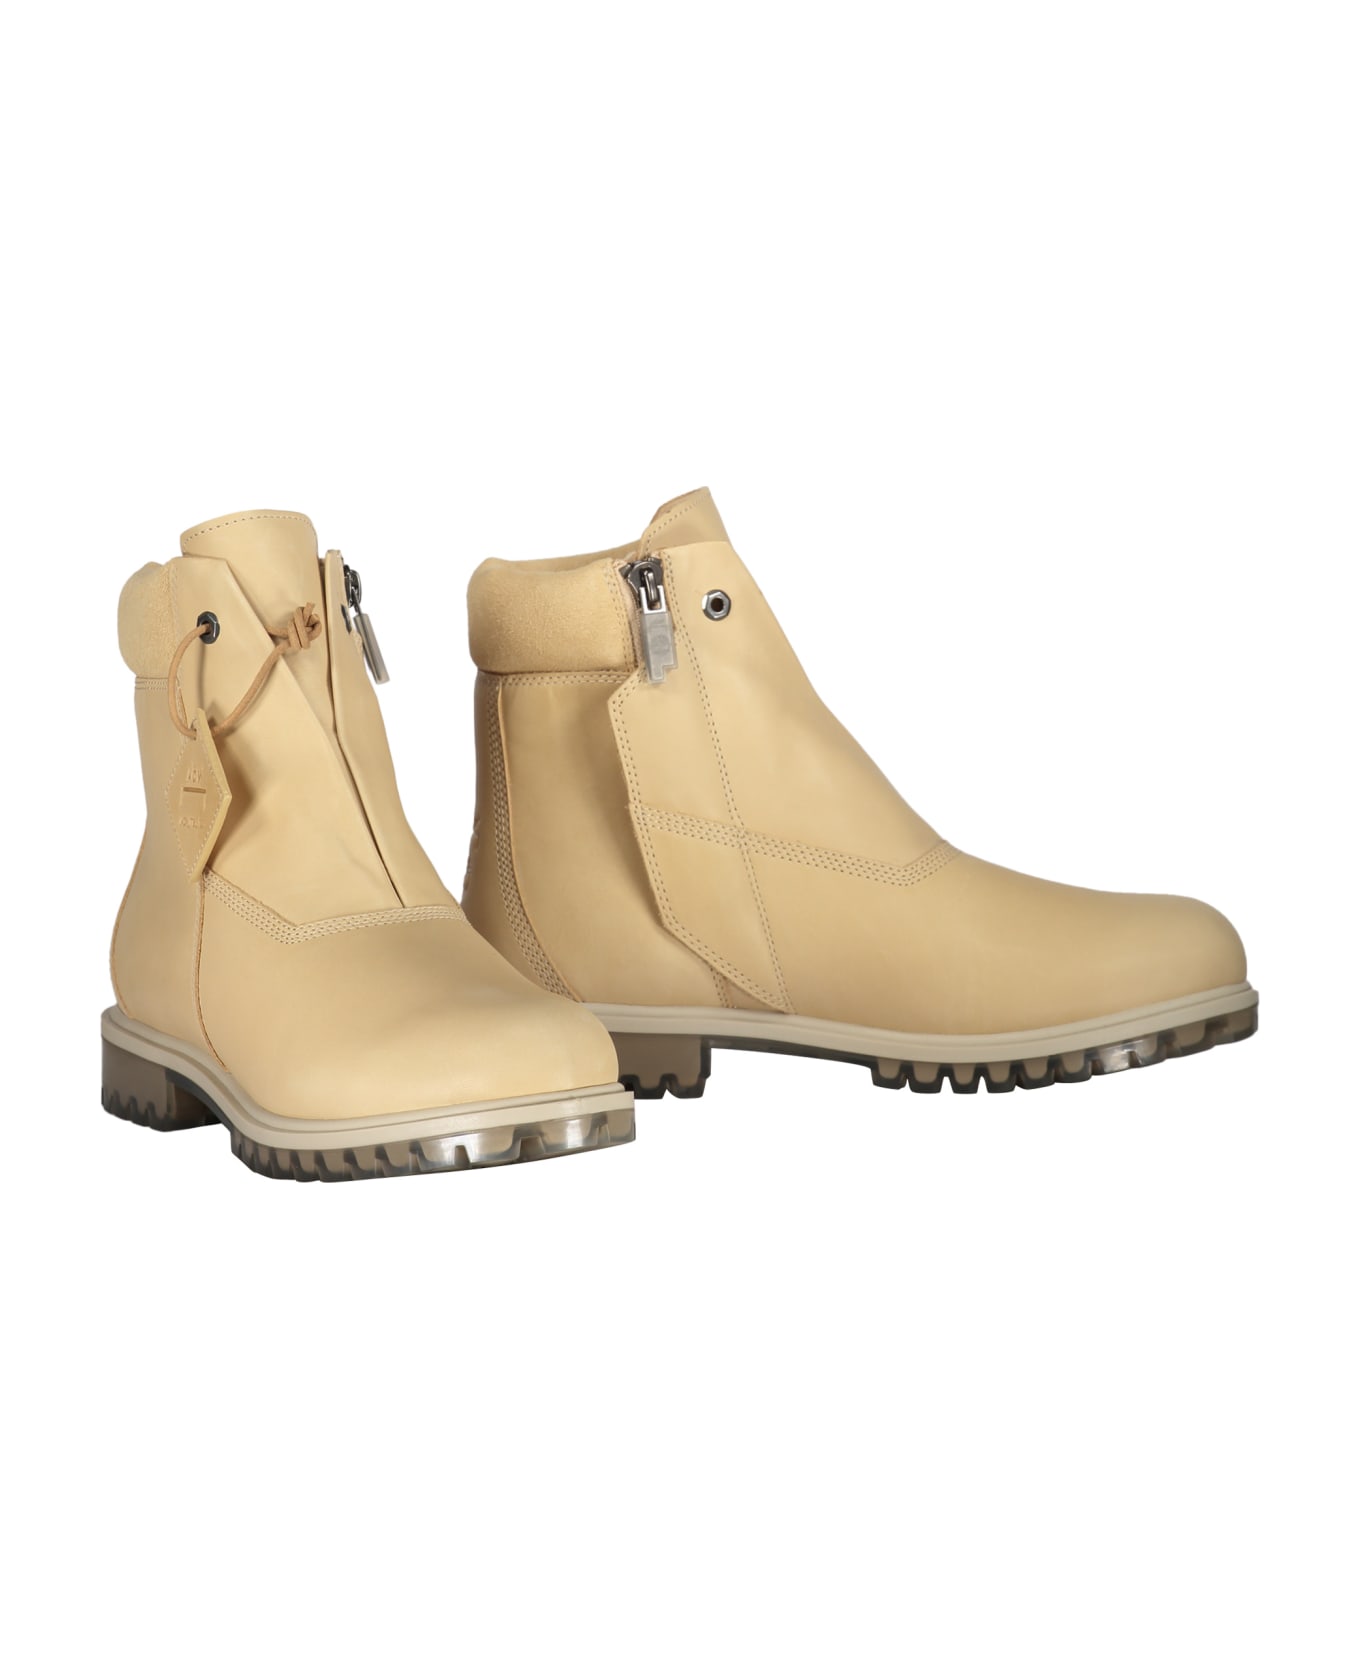 A-COLD-WALL Leather Boots - Sand ブーツ